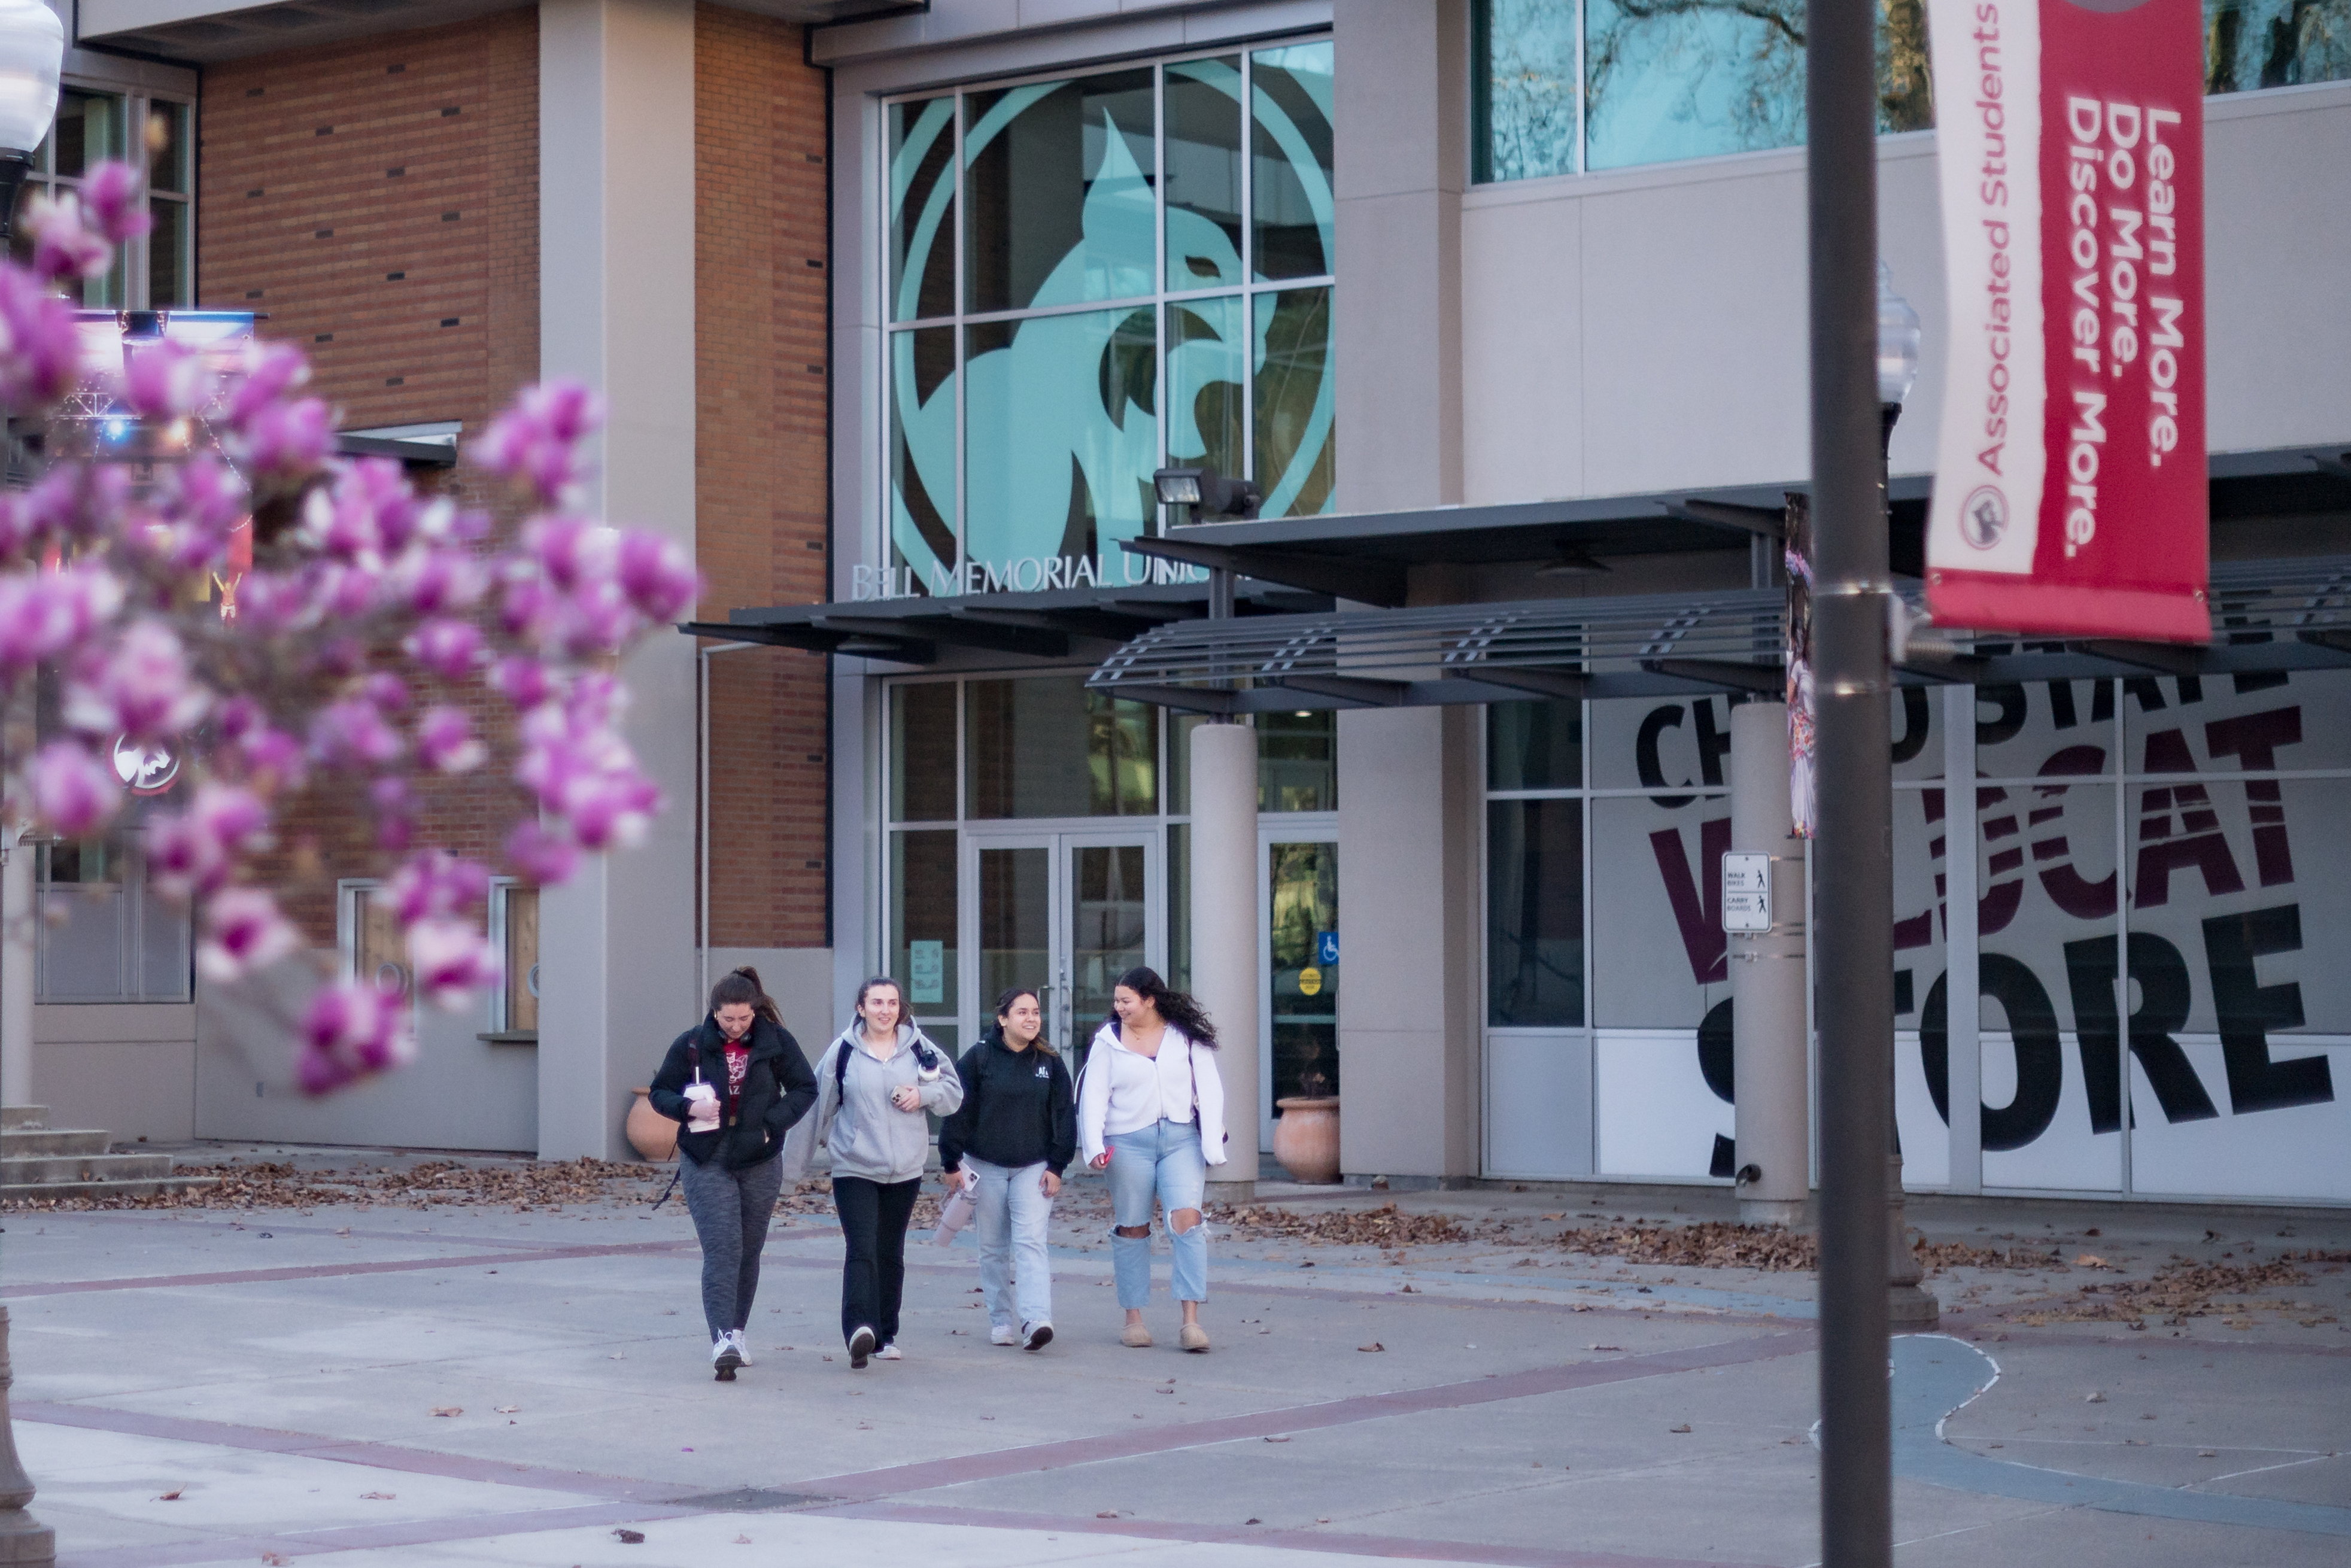 Students walking outside of the Bell Memorial Union.